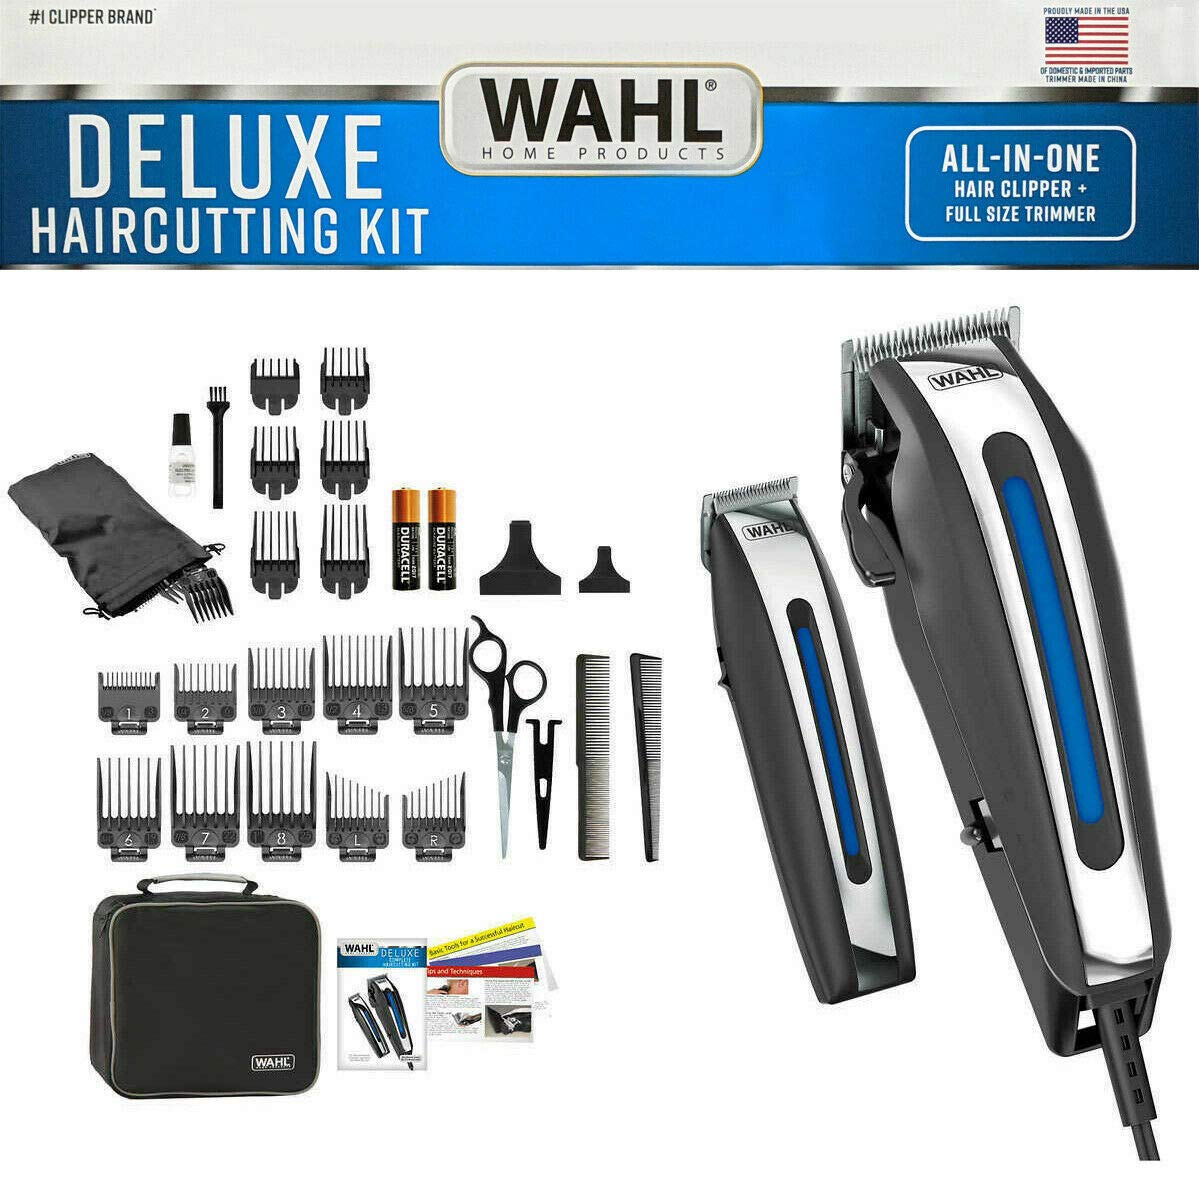 WAHL Deluxe Complete Hair Cutting Kit 29 Piece Clipper Set with Beard Trimmer -Retail $125+!!! BY AMPLEXPO